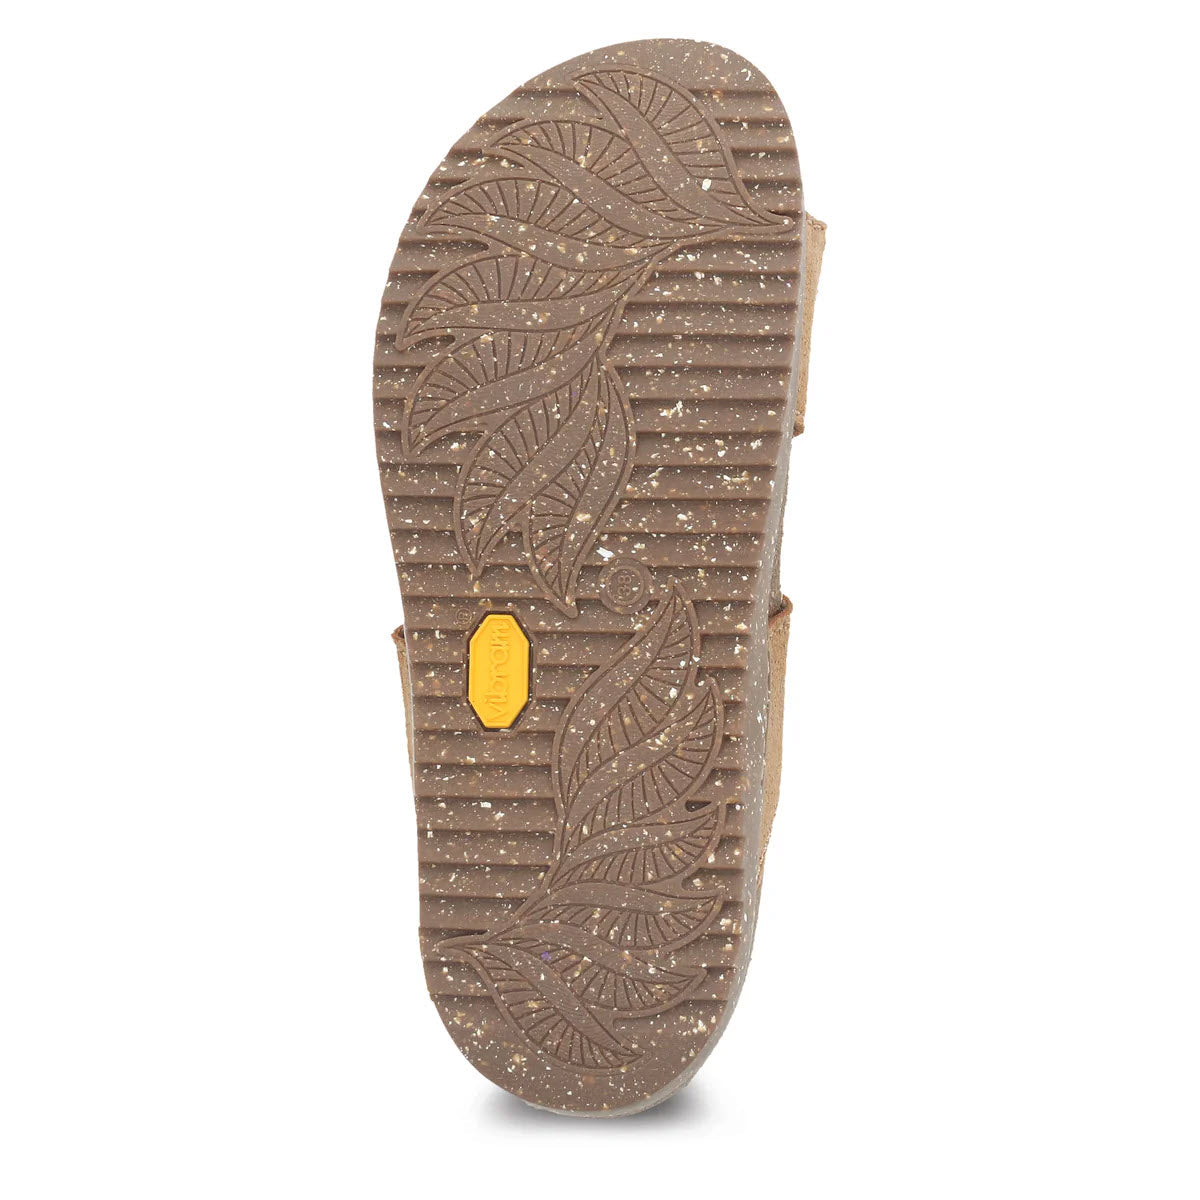 Sole of a brown Dansko Dayna tan shoe featuring a detailed leaf pattern with textured treads and a small yellow Vibram Ecostep EVO rubber outsole logo.